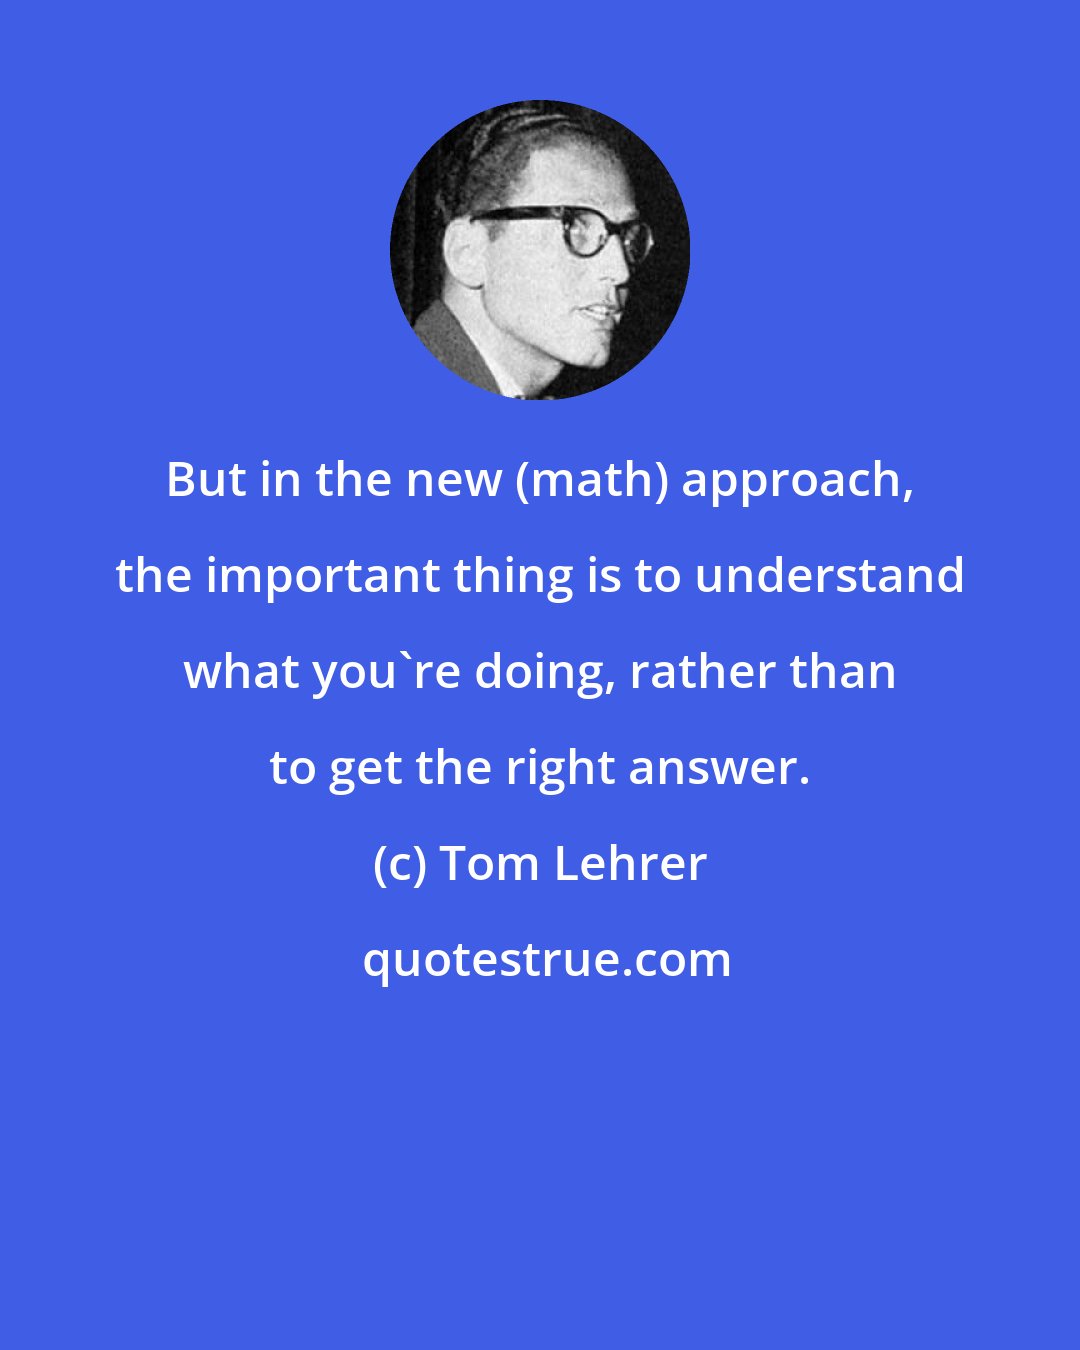 Tom Lehrer: But in the new (math) approach, the important thing is to understand what you're doing, rather than to get the right answer.